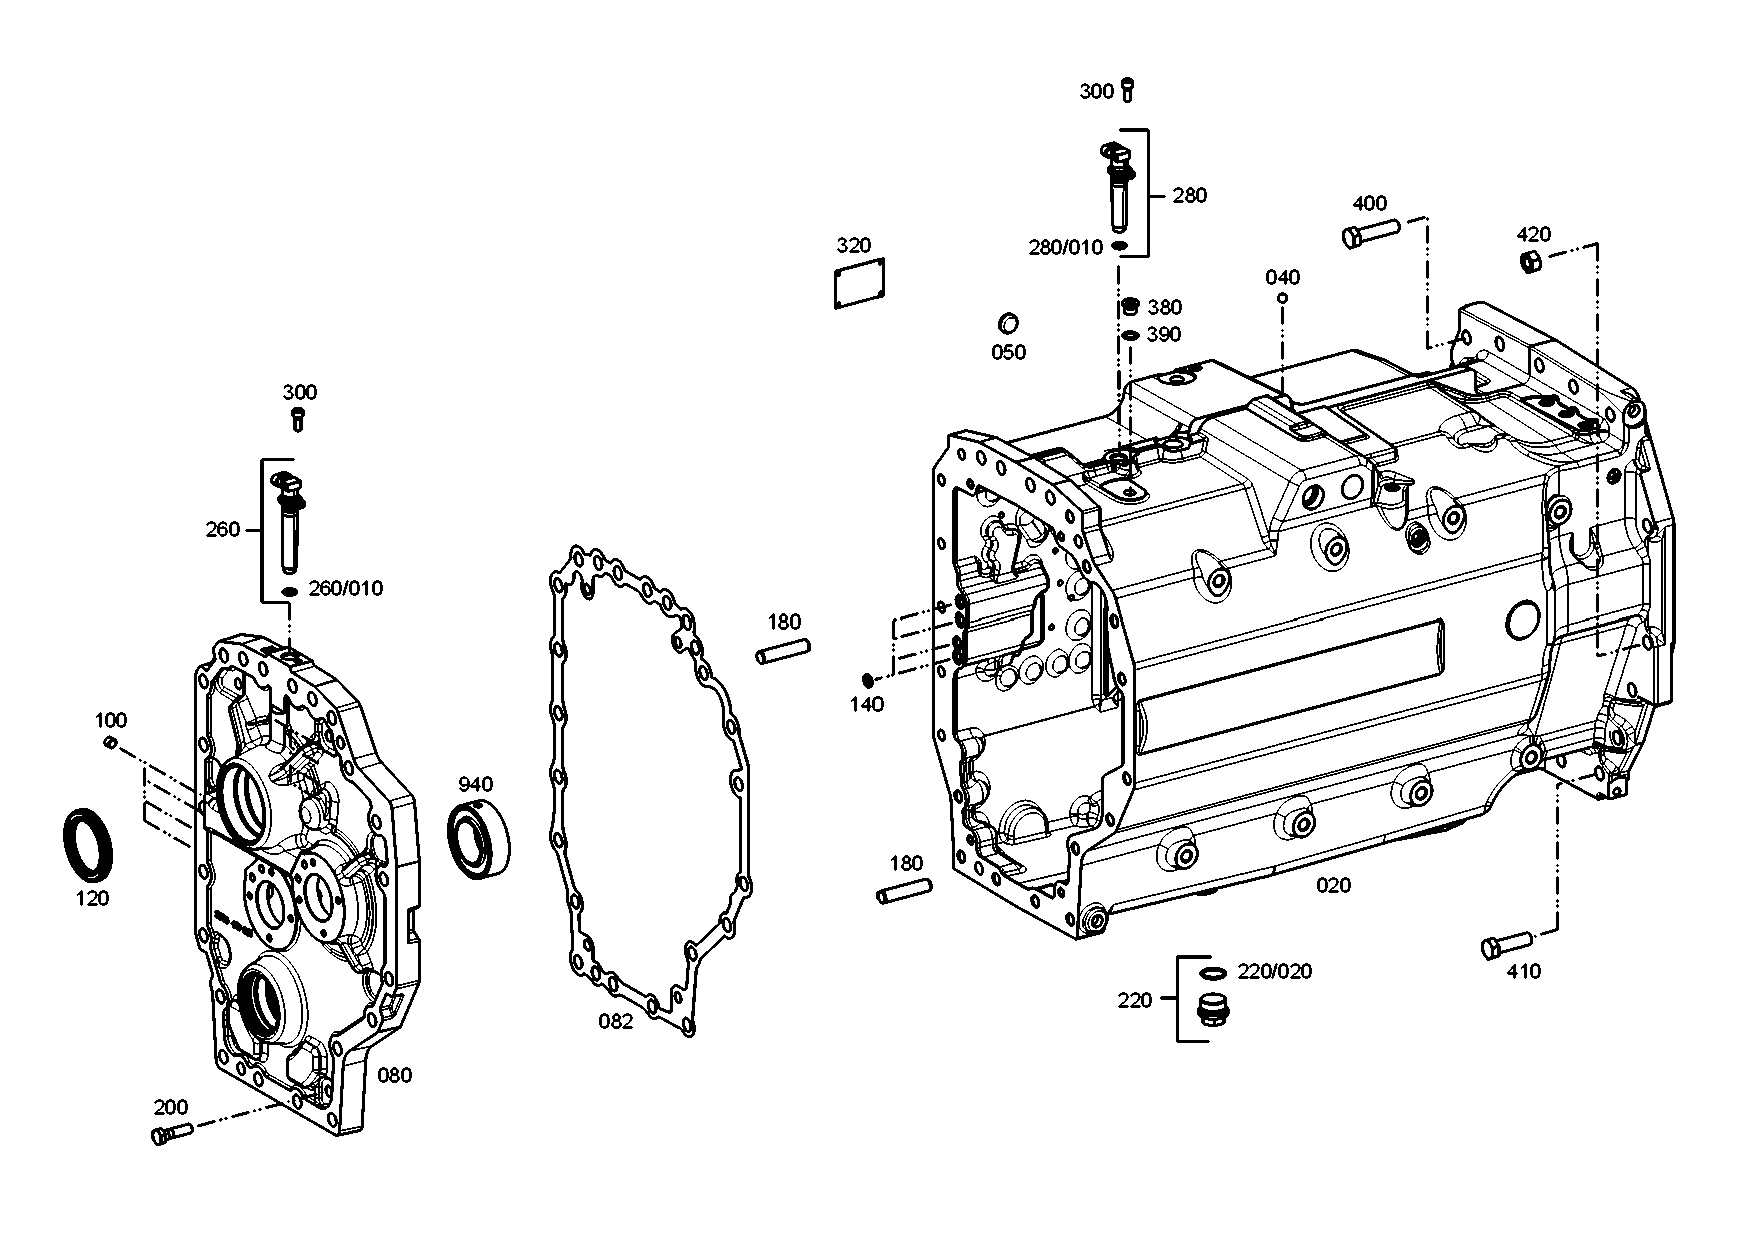 drawing for AGCO X486.545.900.000 - HEXAGON SCREW (figure 2)